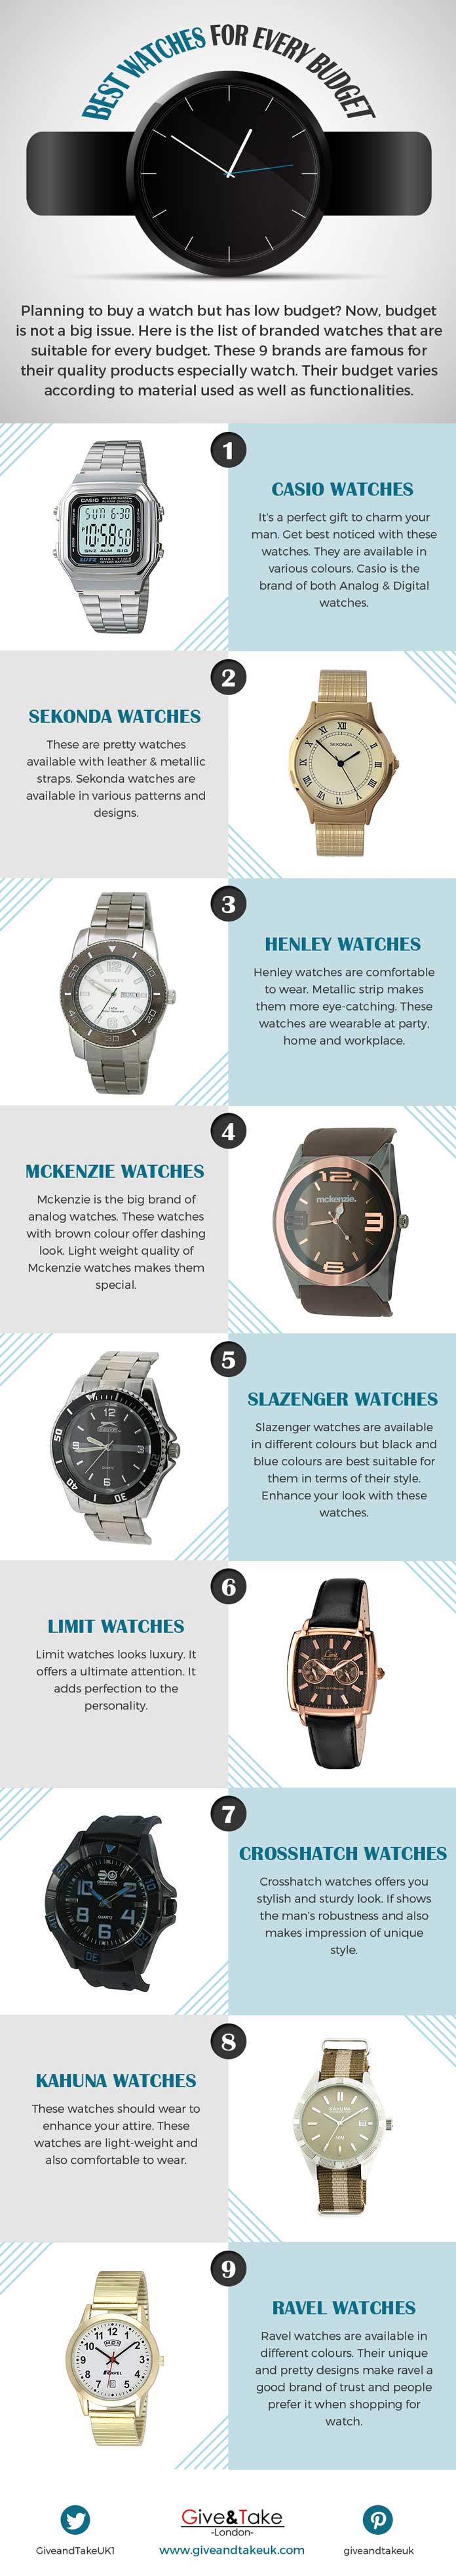 Best Watches for Every Budget